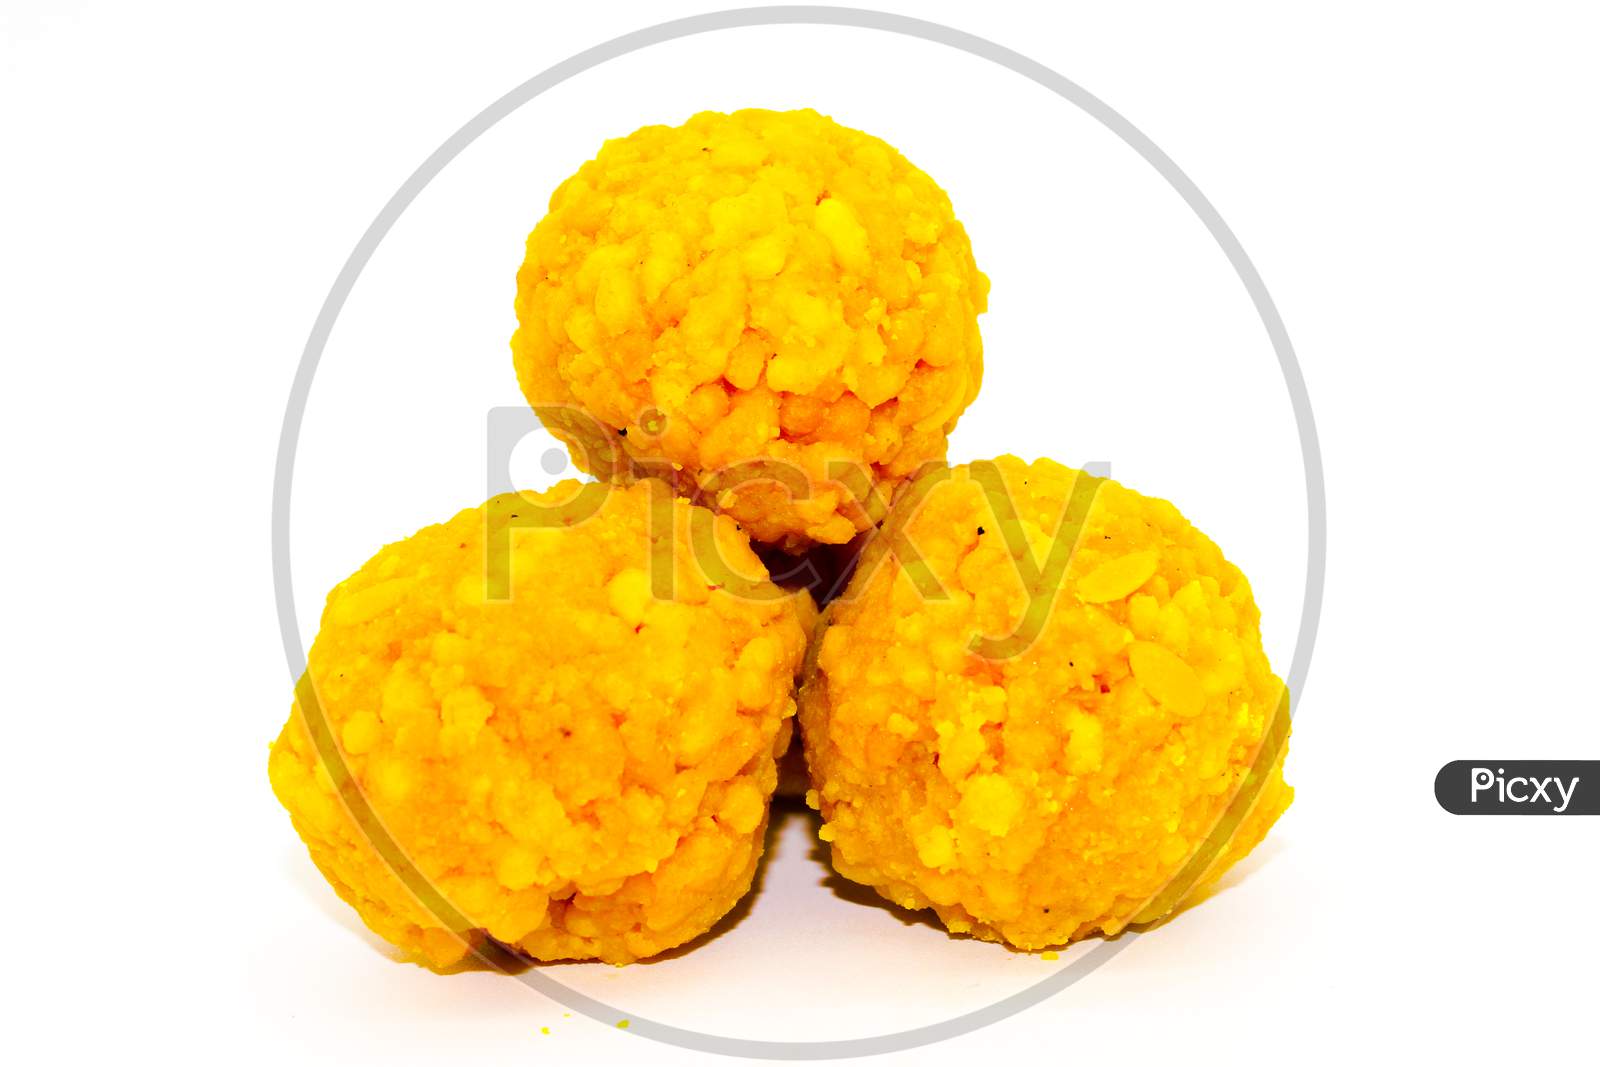 Boondi Ladoo On White Background With Selective Focus